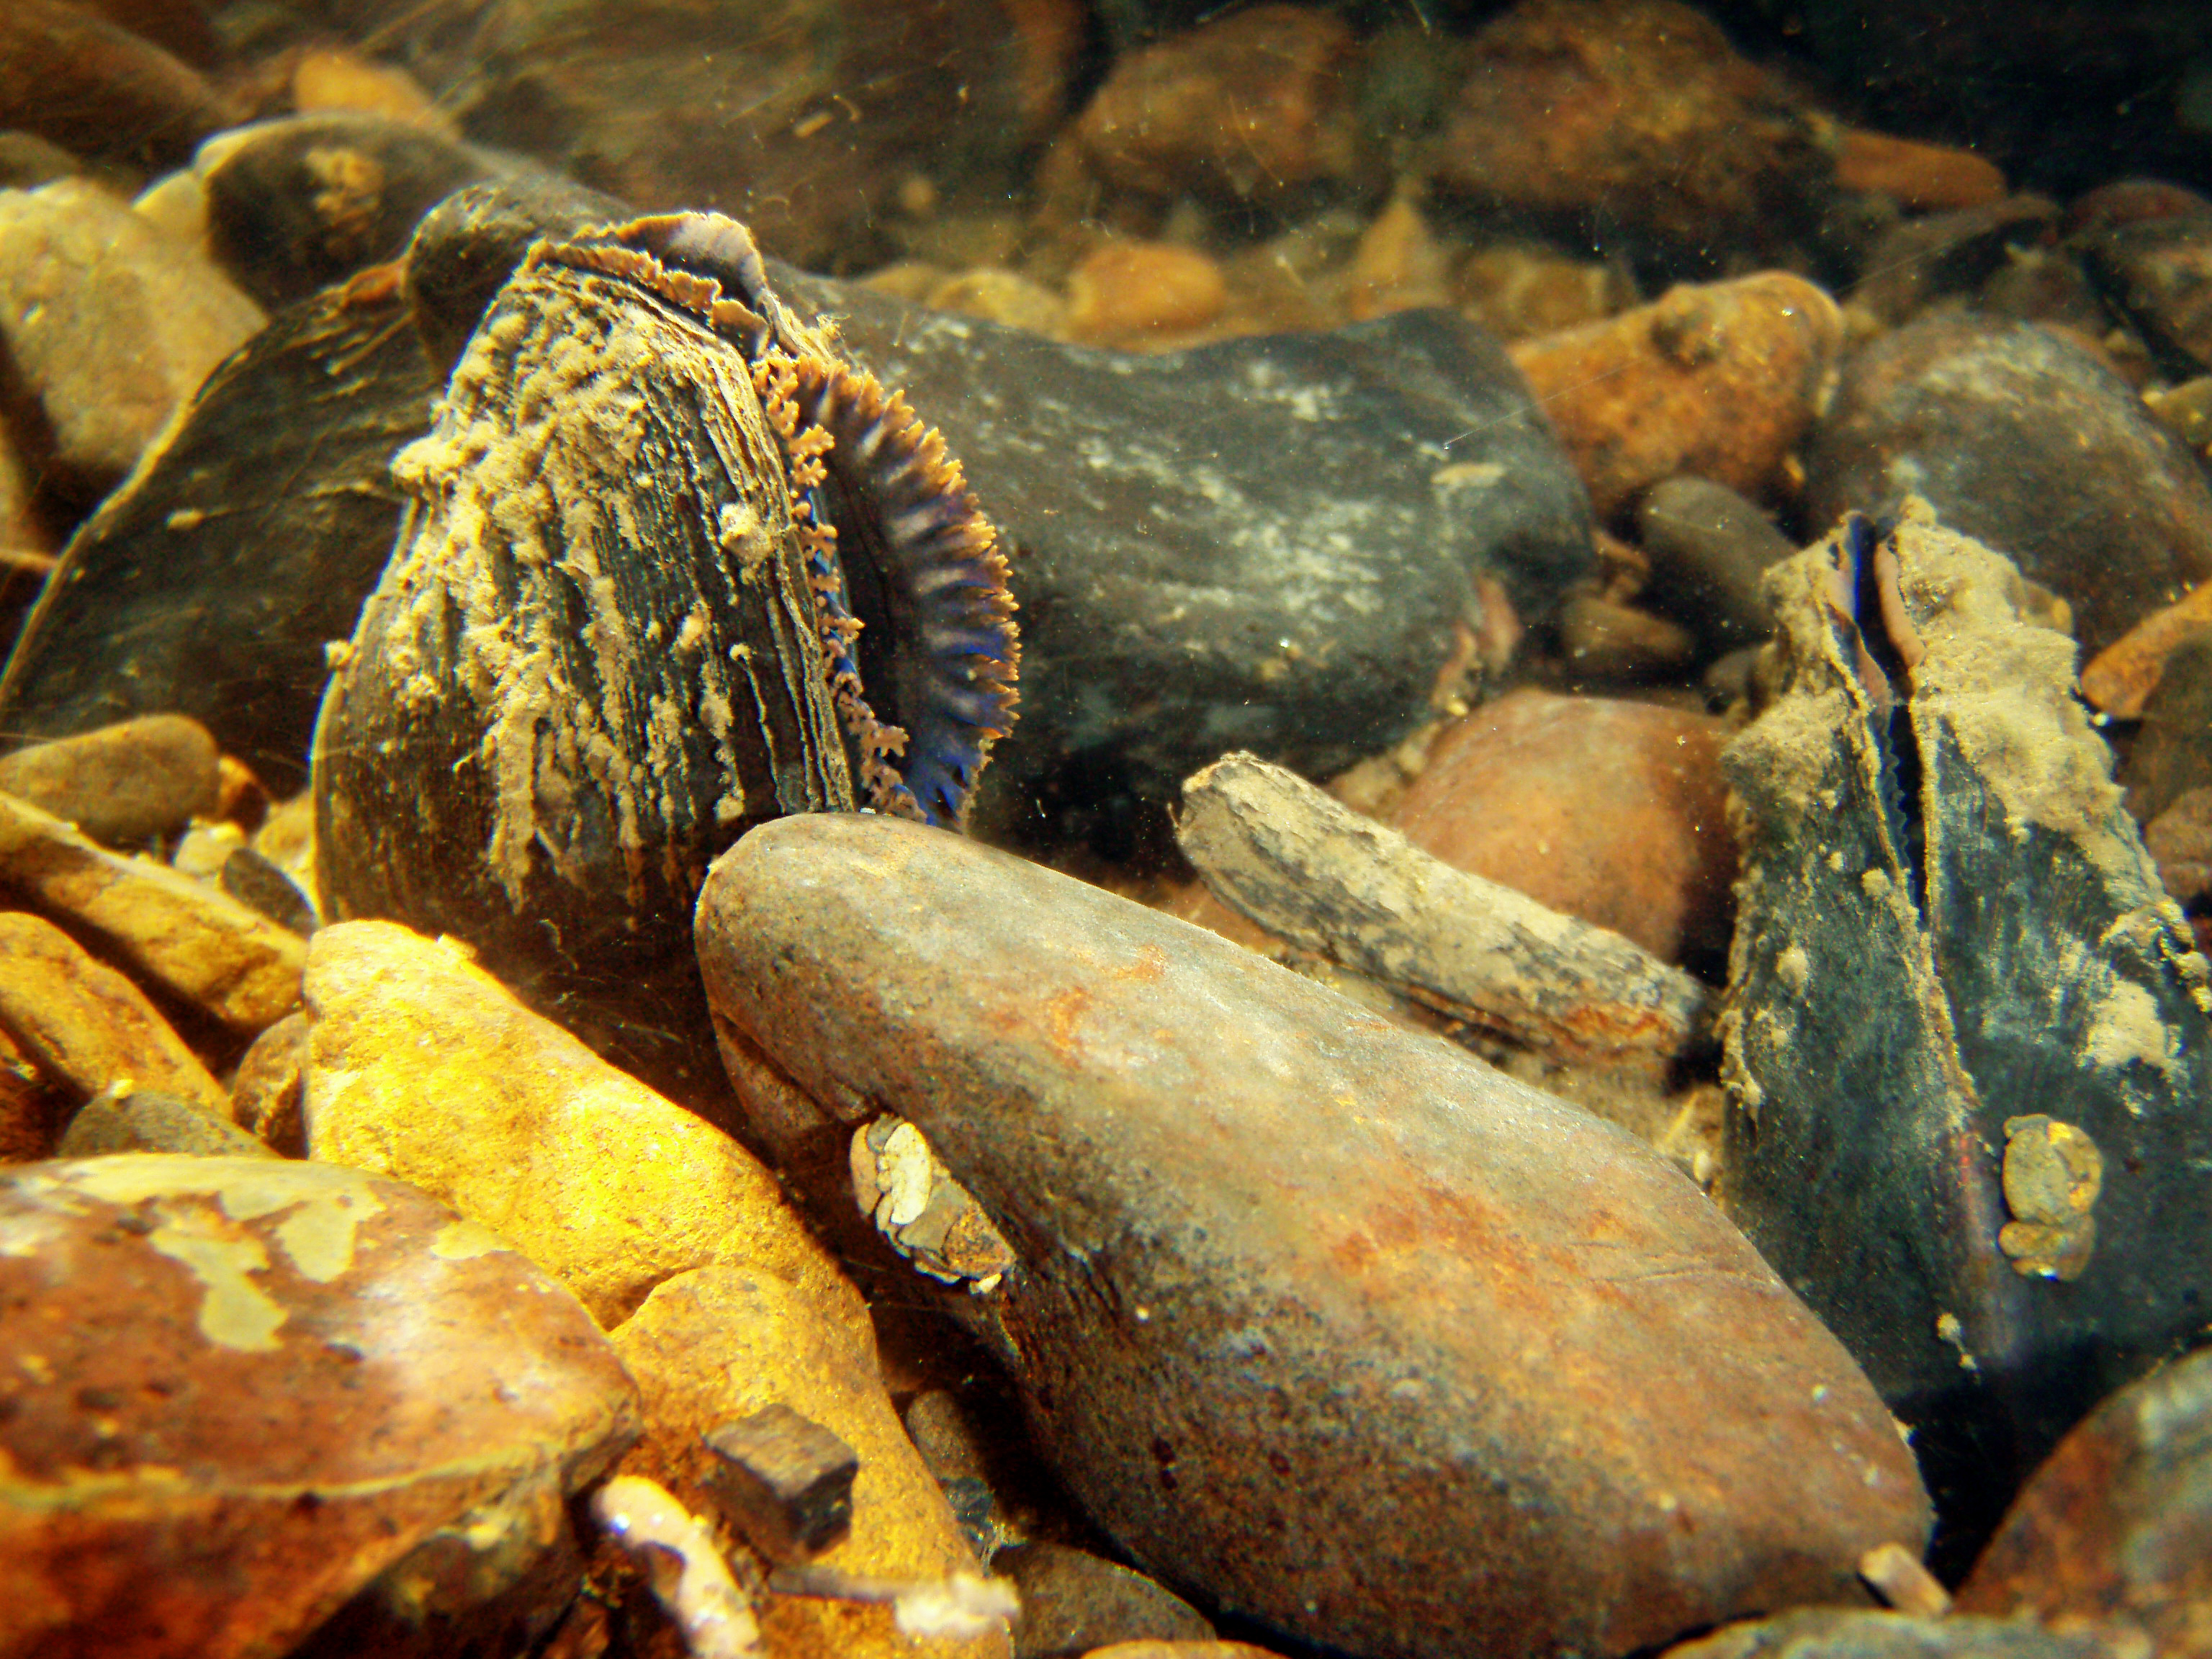 Orange and bluish mussels are gathered together.